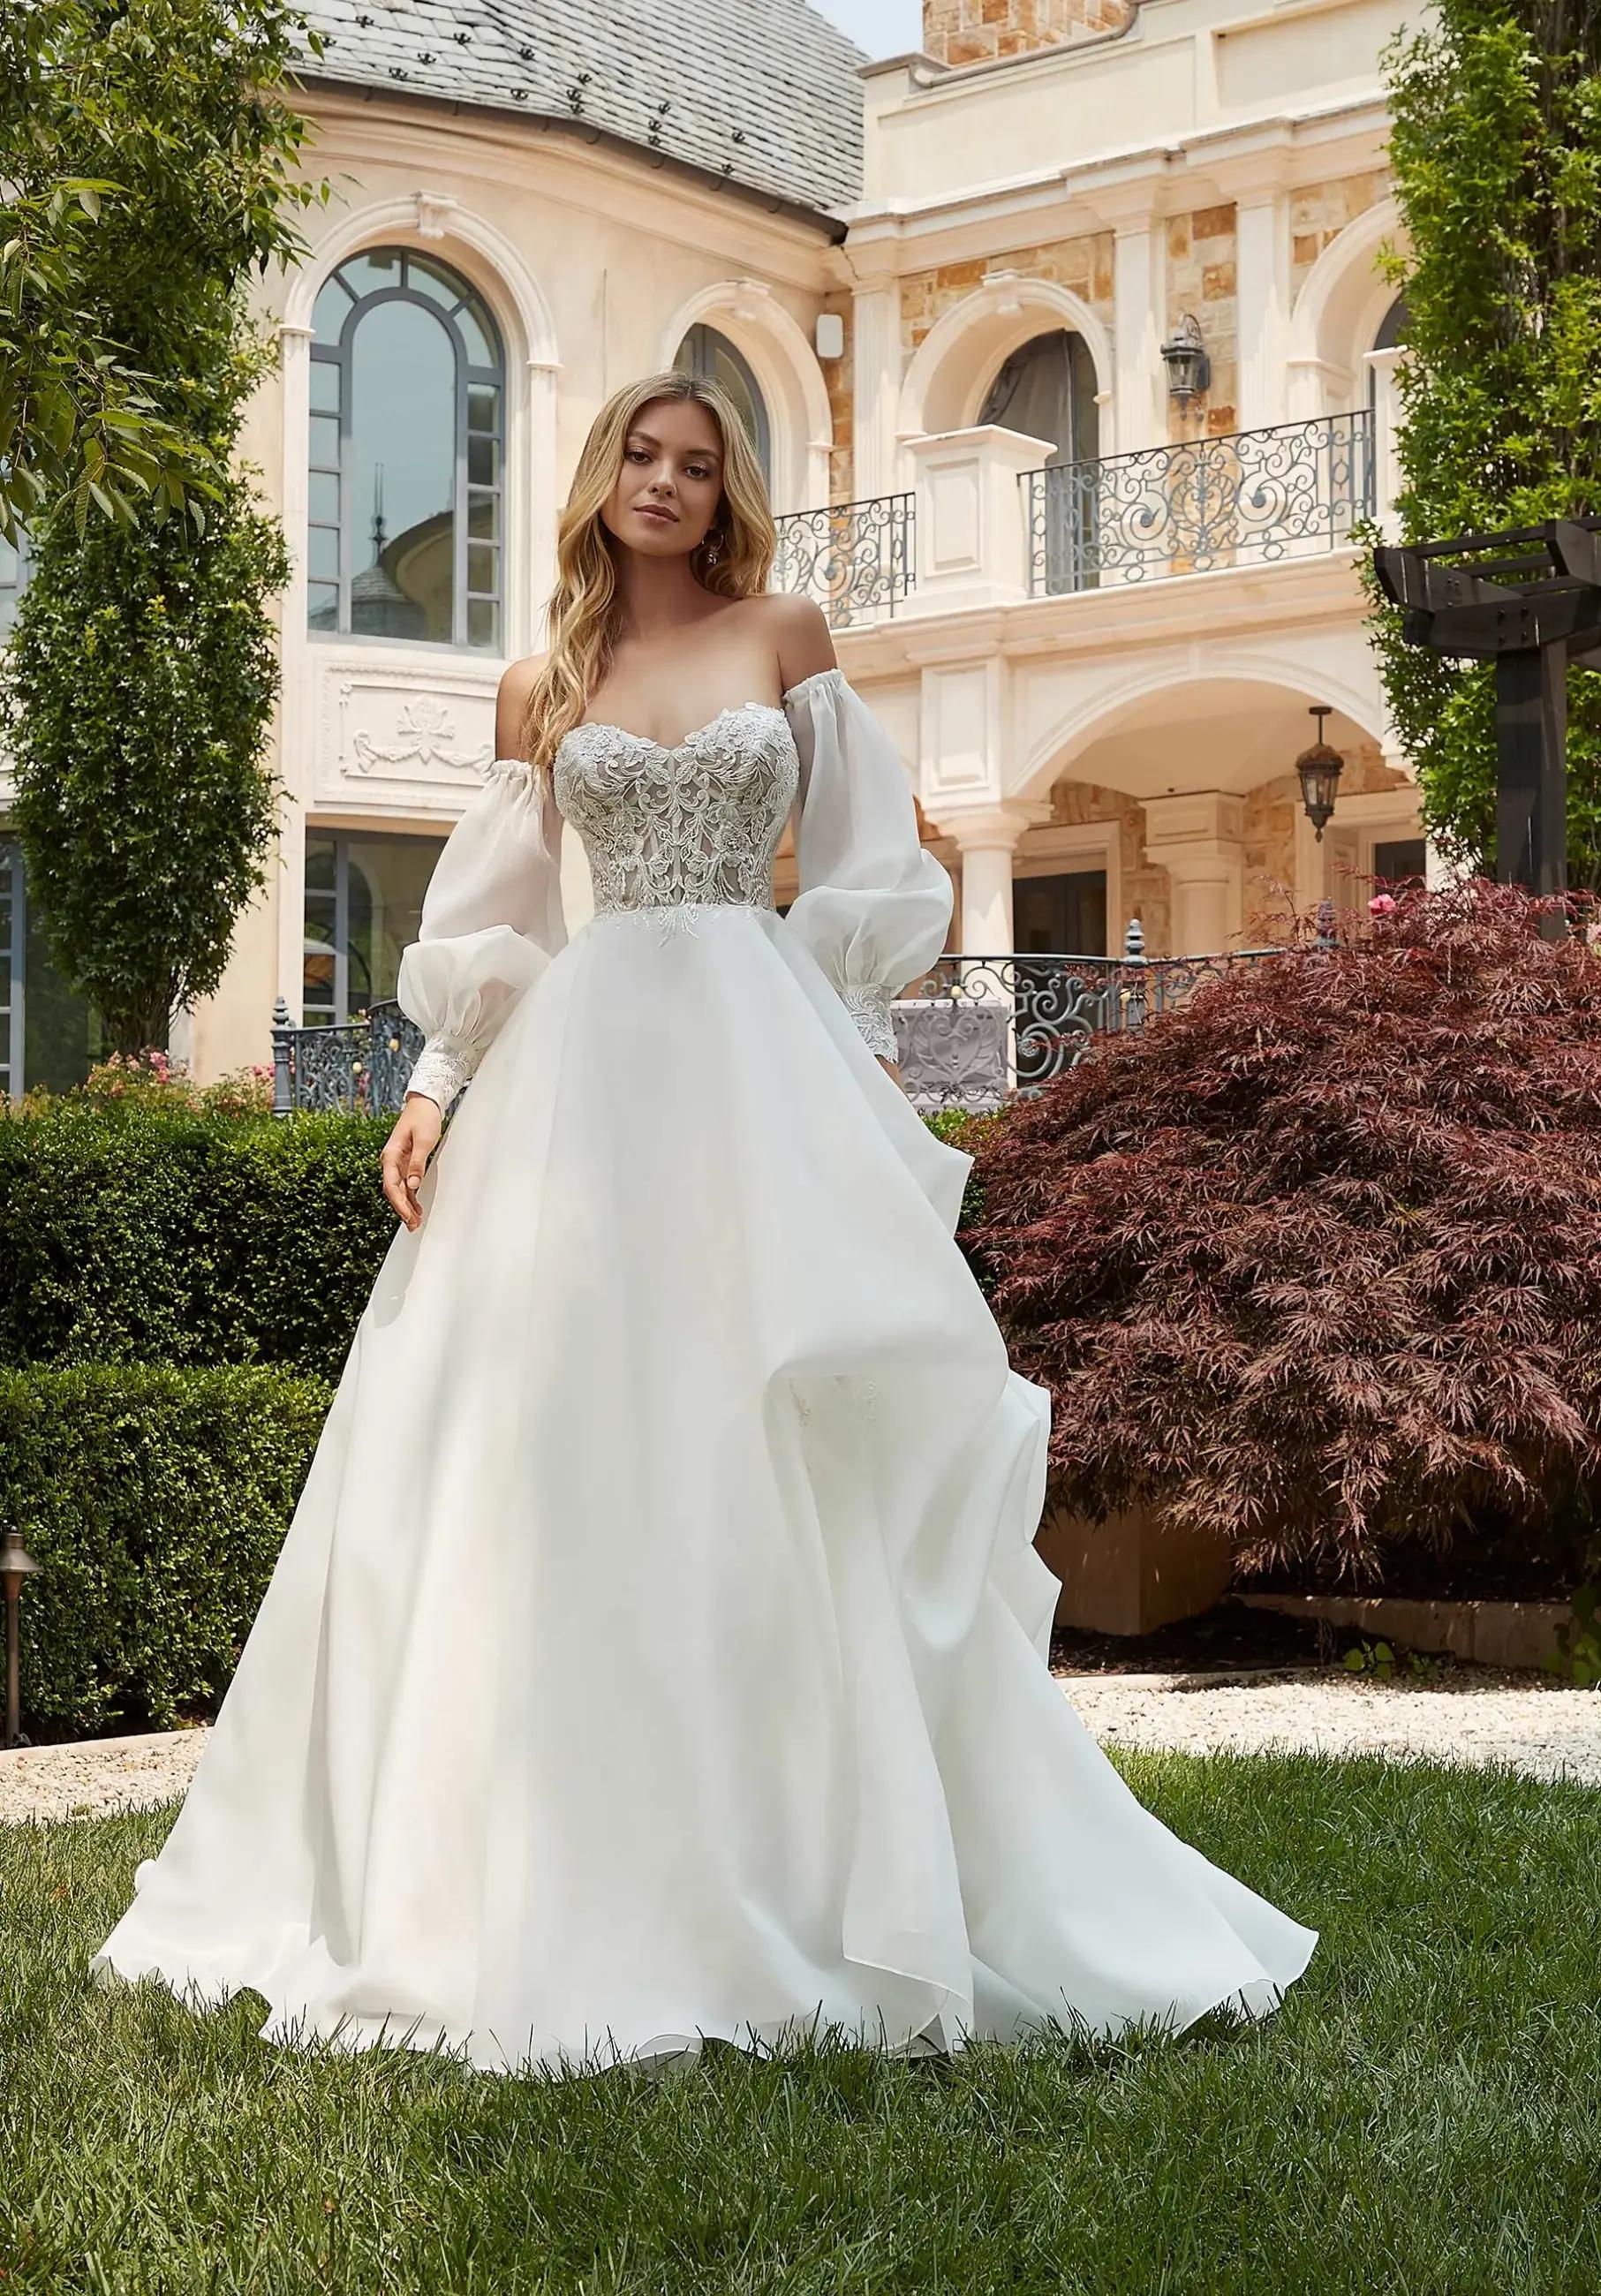 Statement Sleeves: Bold and Dramatic Trends Taking Over Wedding Gown Design Image